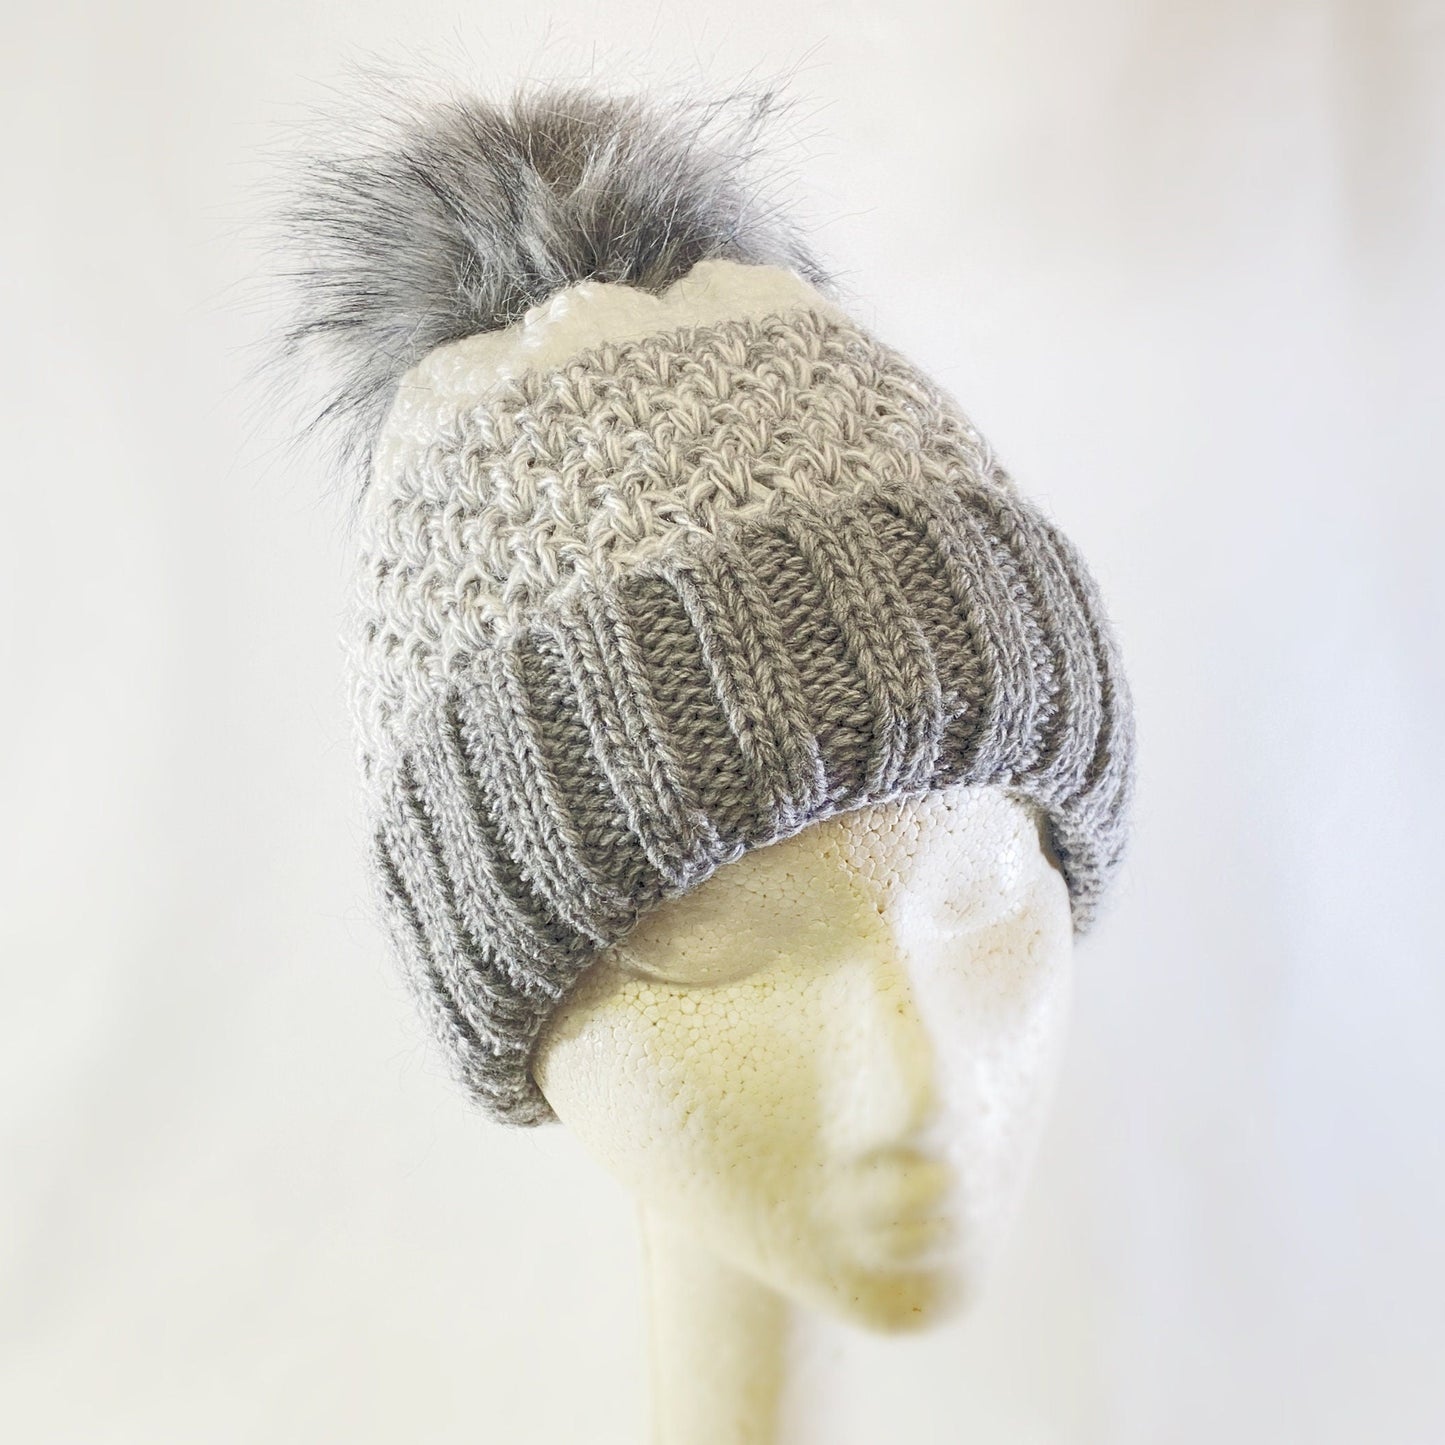 Gray and White Winter Beanie With Pompom - Made From Italian Wool, Acrylic Yarn, and Faux Fur